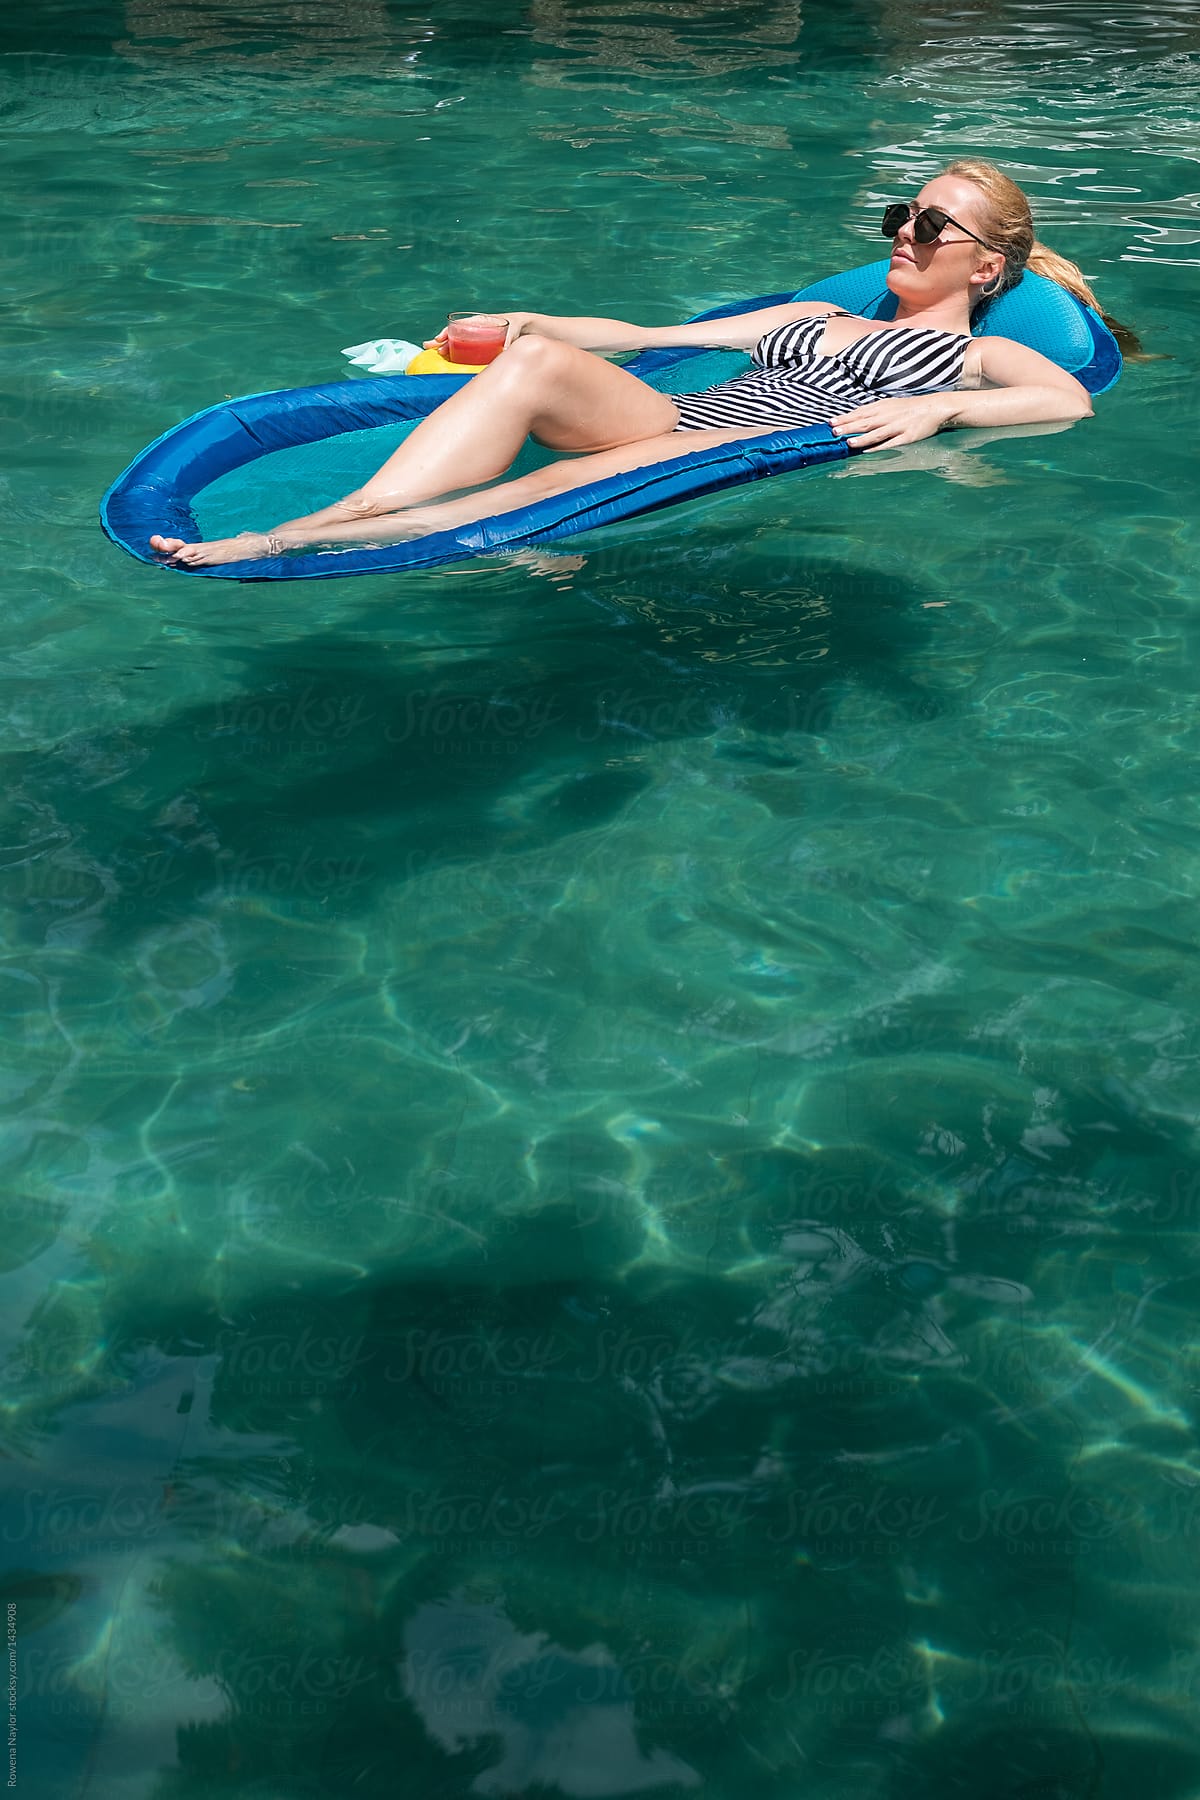 Attractive young woman sunbathing on floating bed in pool